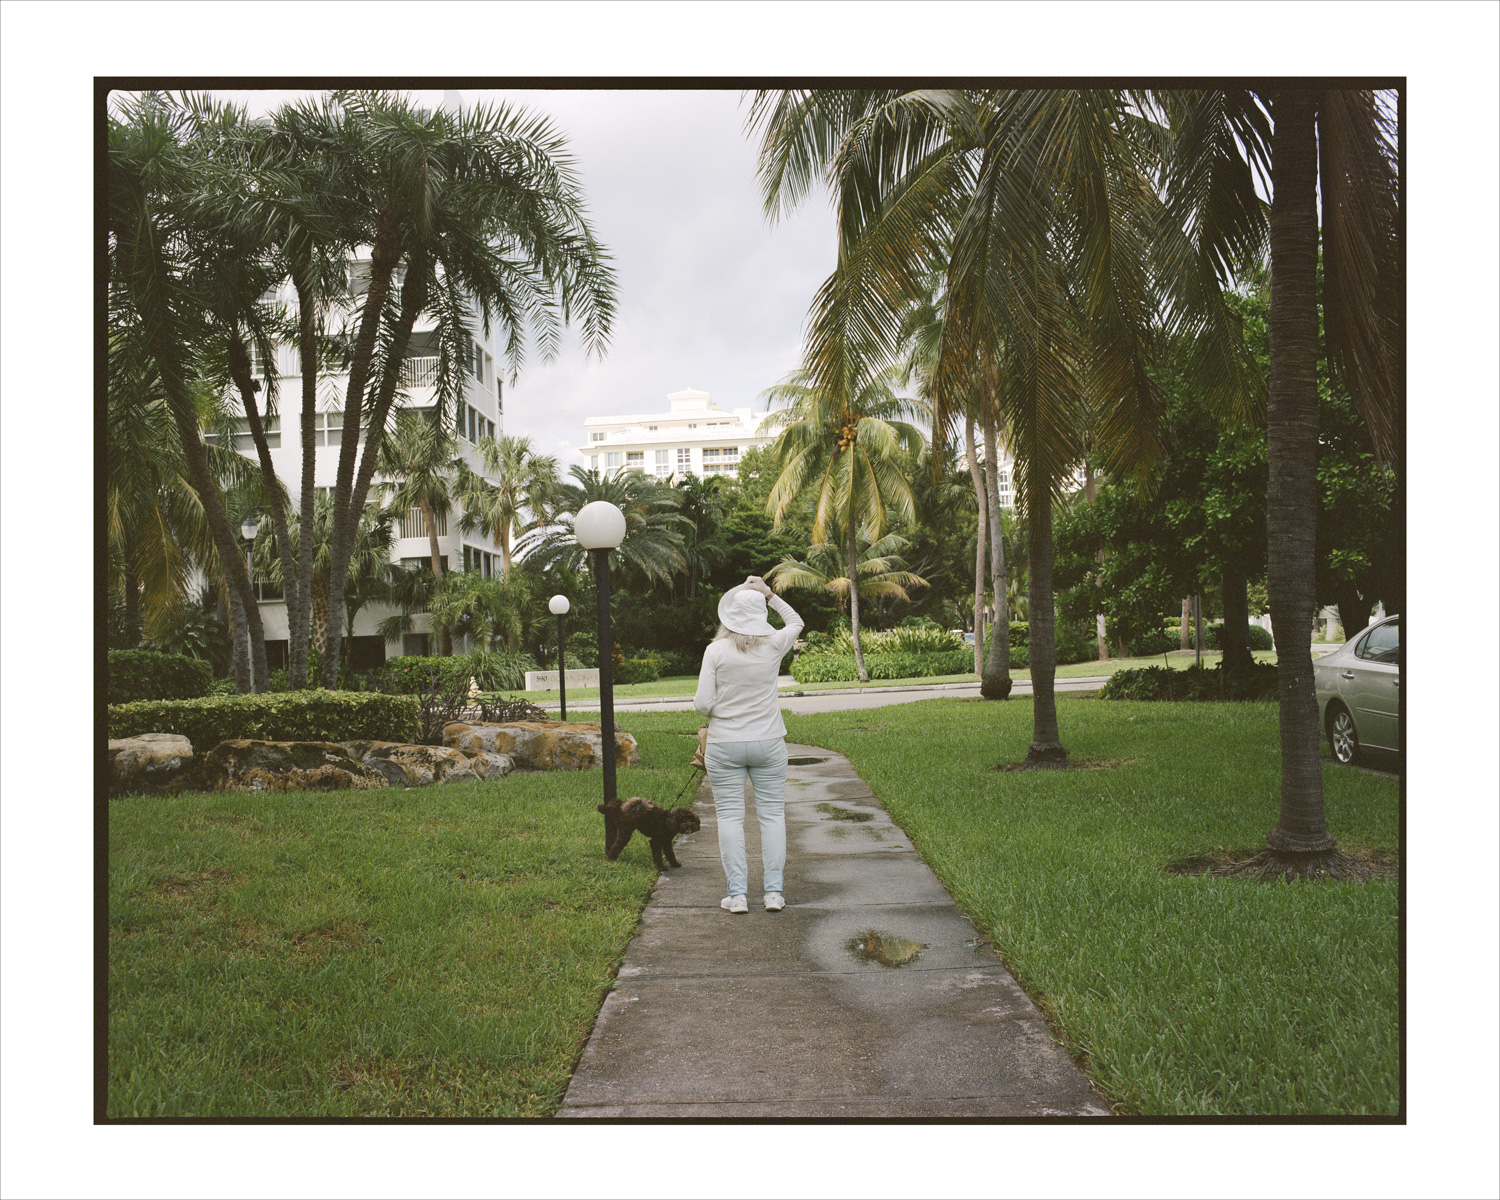 nature scene of an older woman in all white standing in a park